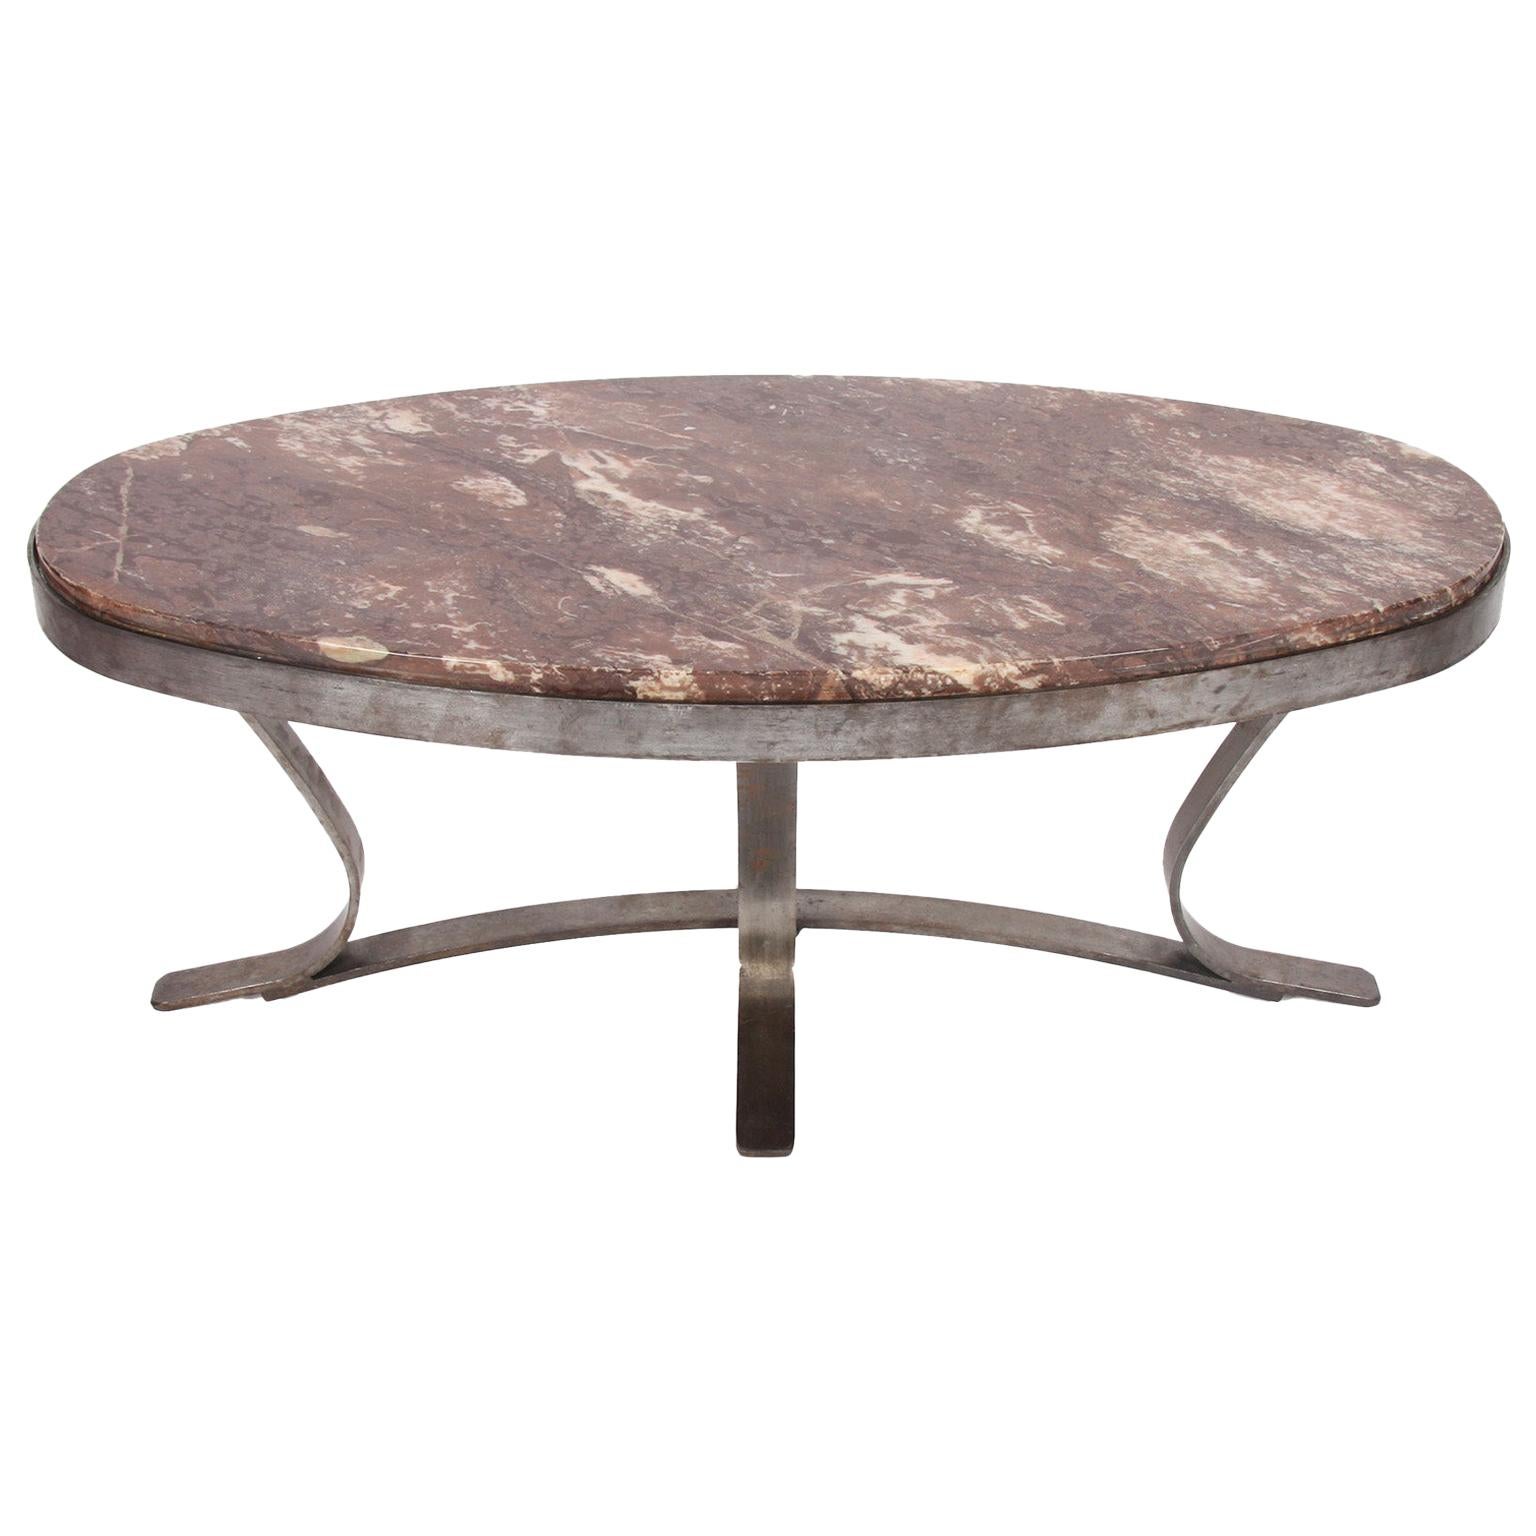 Vintage French Oval Marble and Brushed Steel Coffee Table For Sale